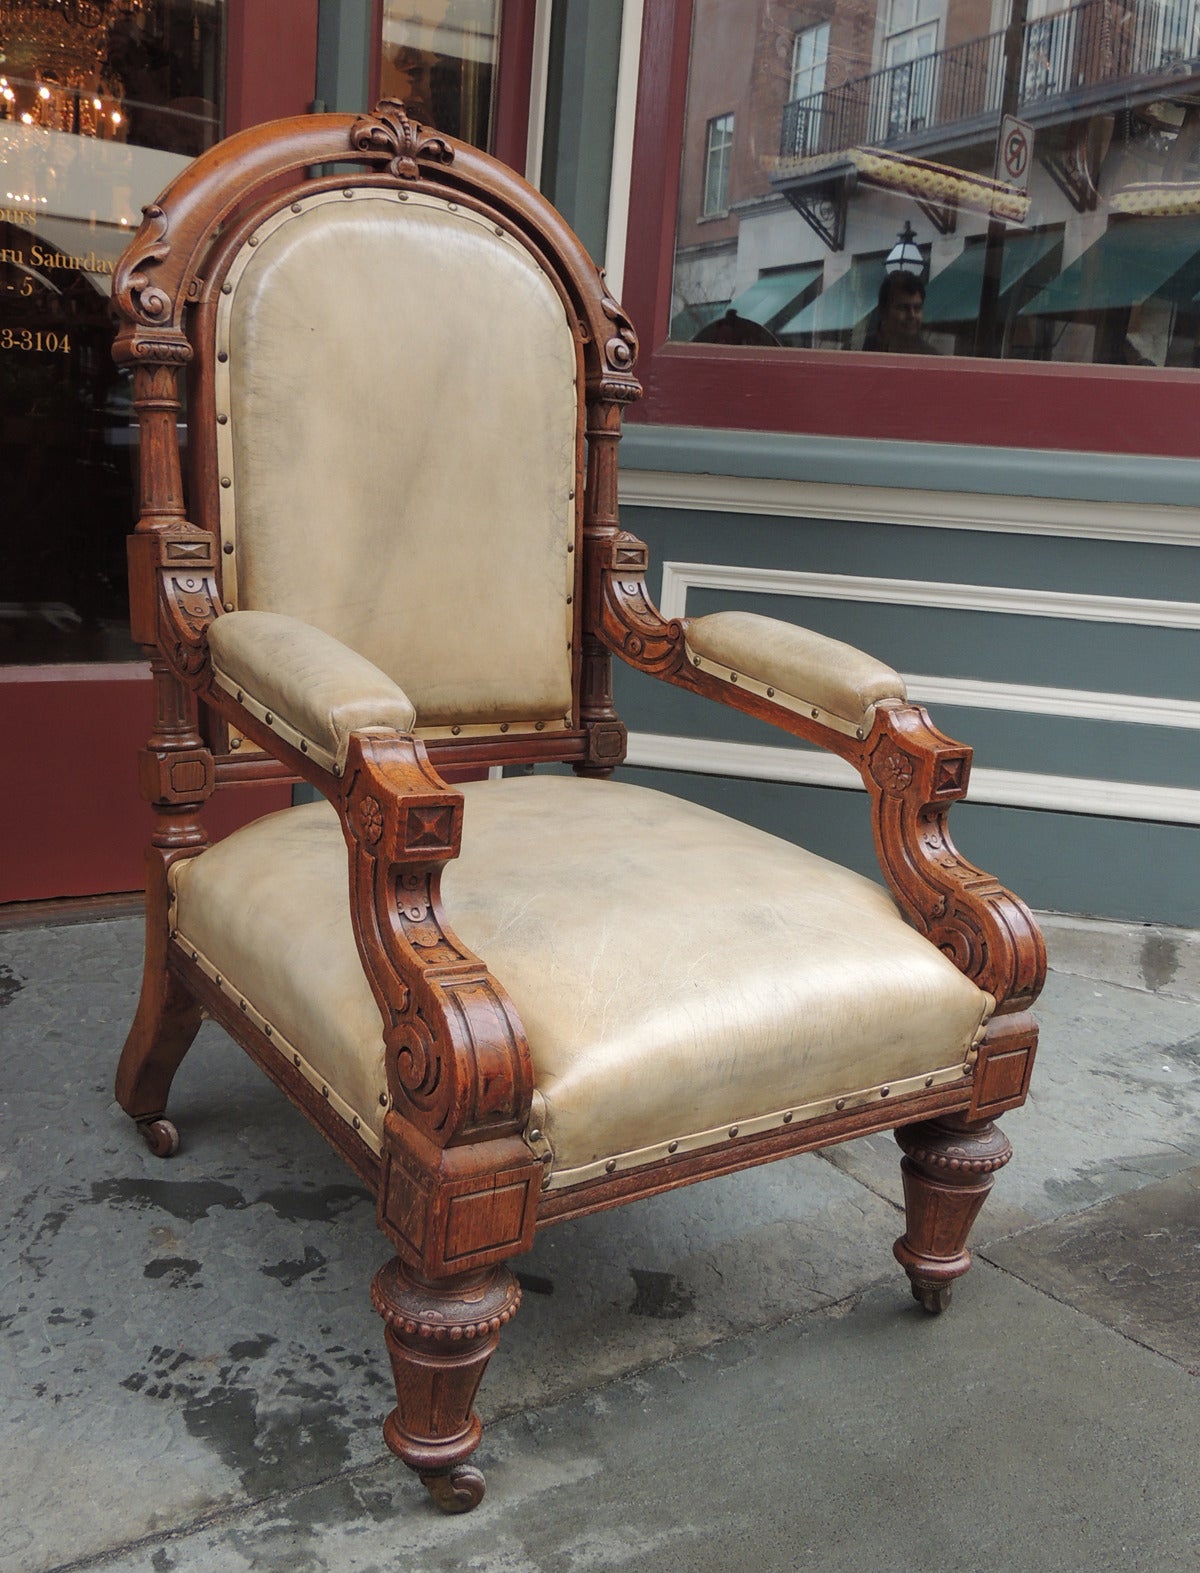 This pair of chairs were made in England, circa 1840. The chairs are made of solid oak and feature intricate carvings on all sides. The arms of the chairs have upholstered padding and unique carved details. The legs have their original casters with